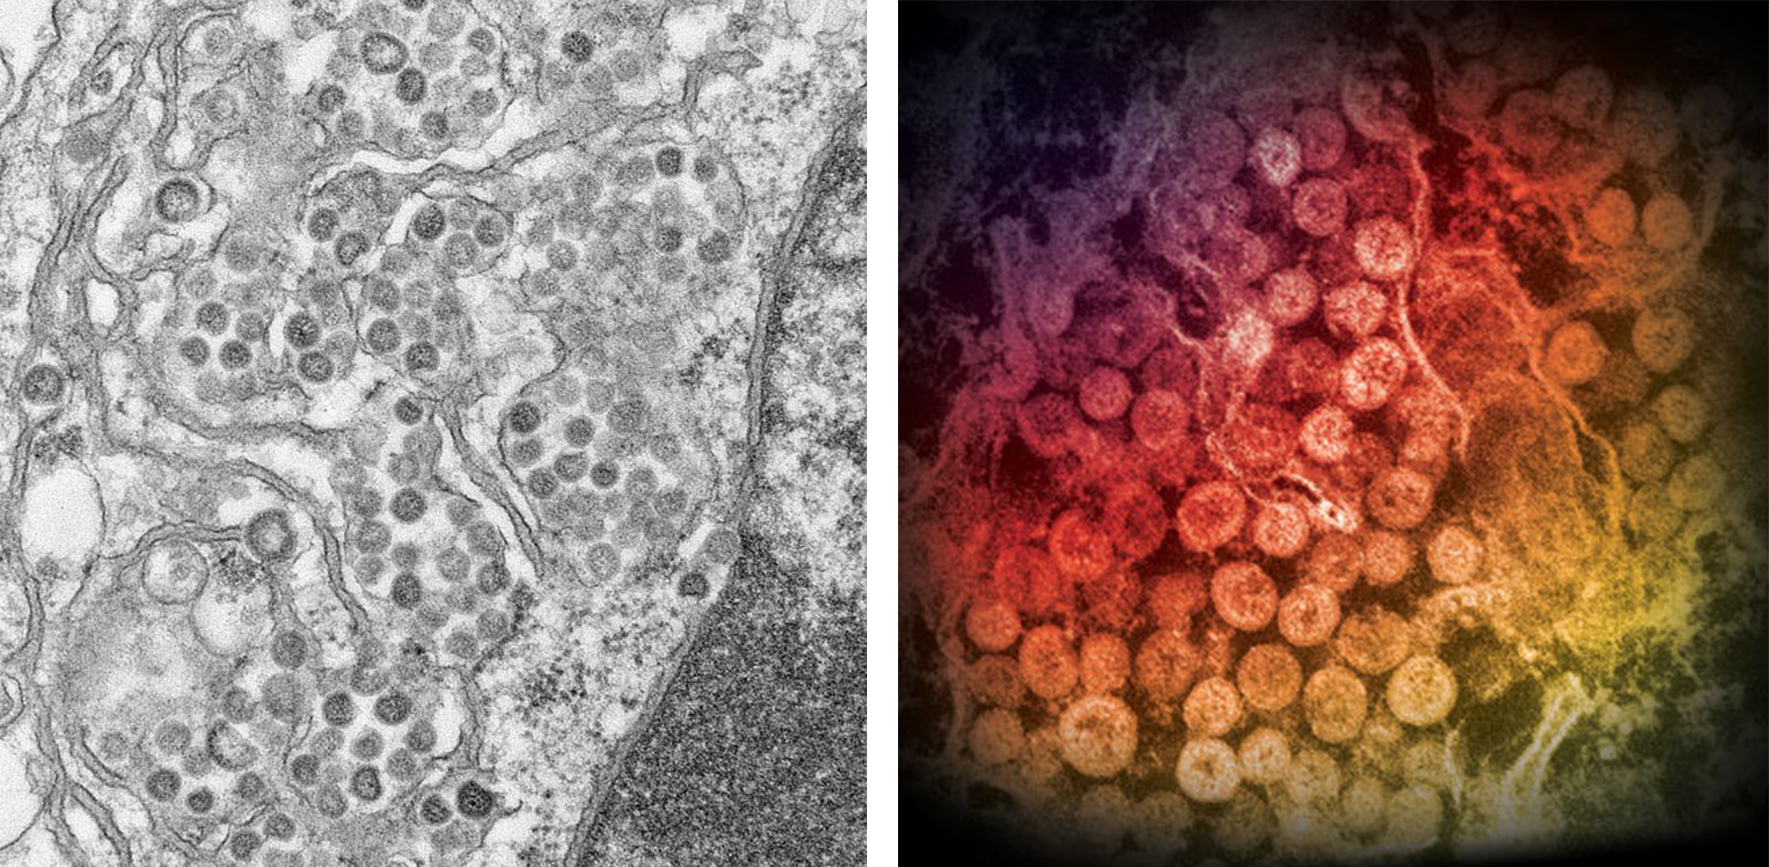  Electron micrographs of ultra-thin sections of MERS-CoV. 